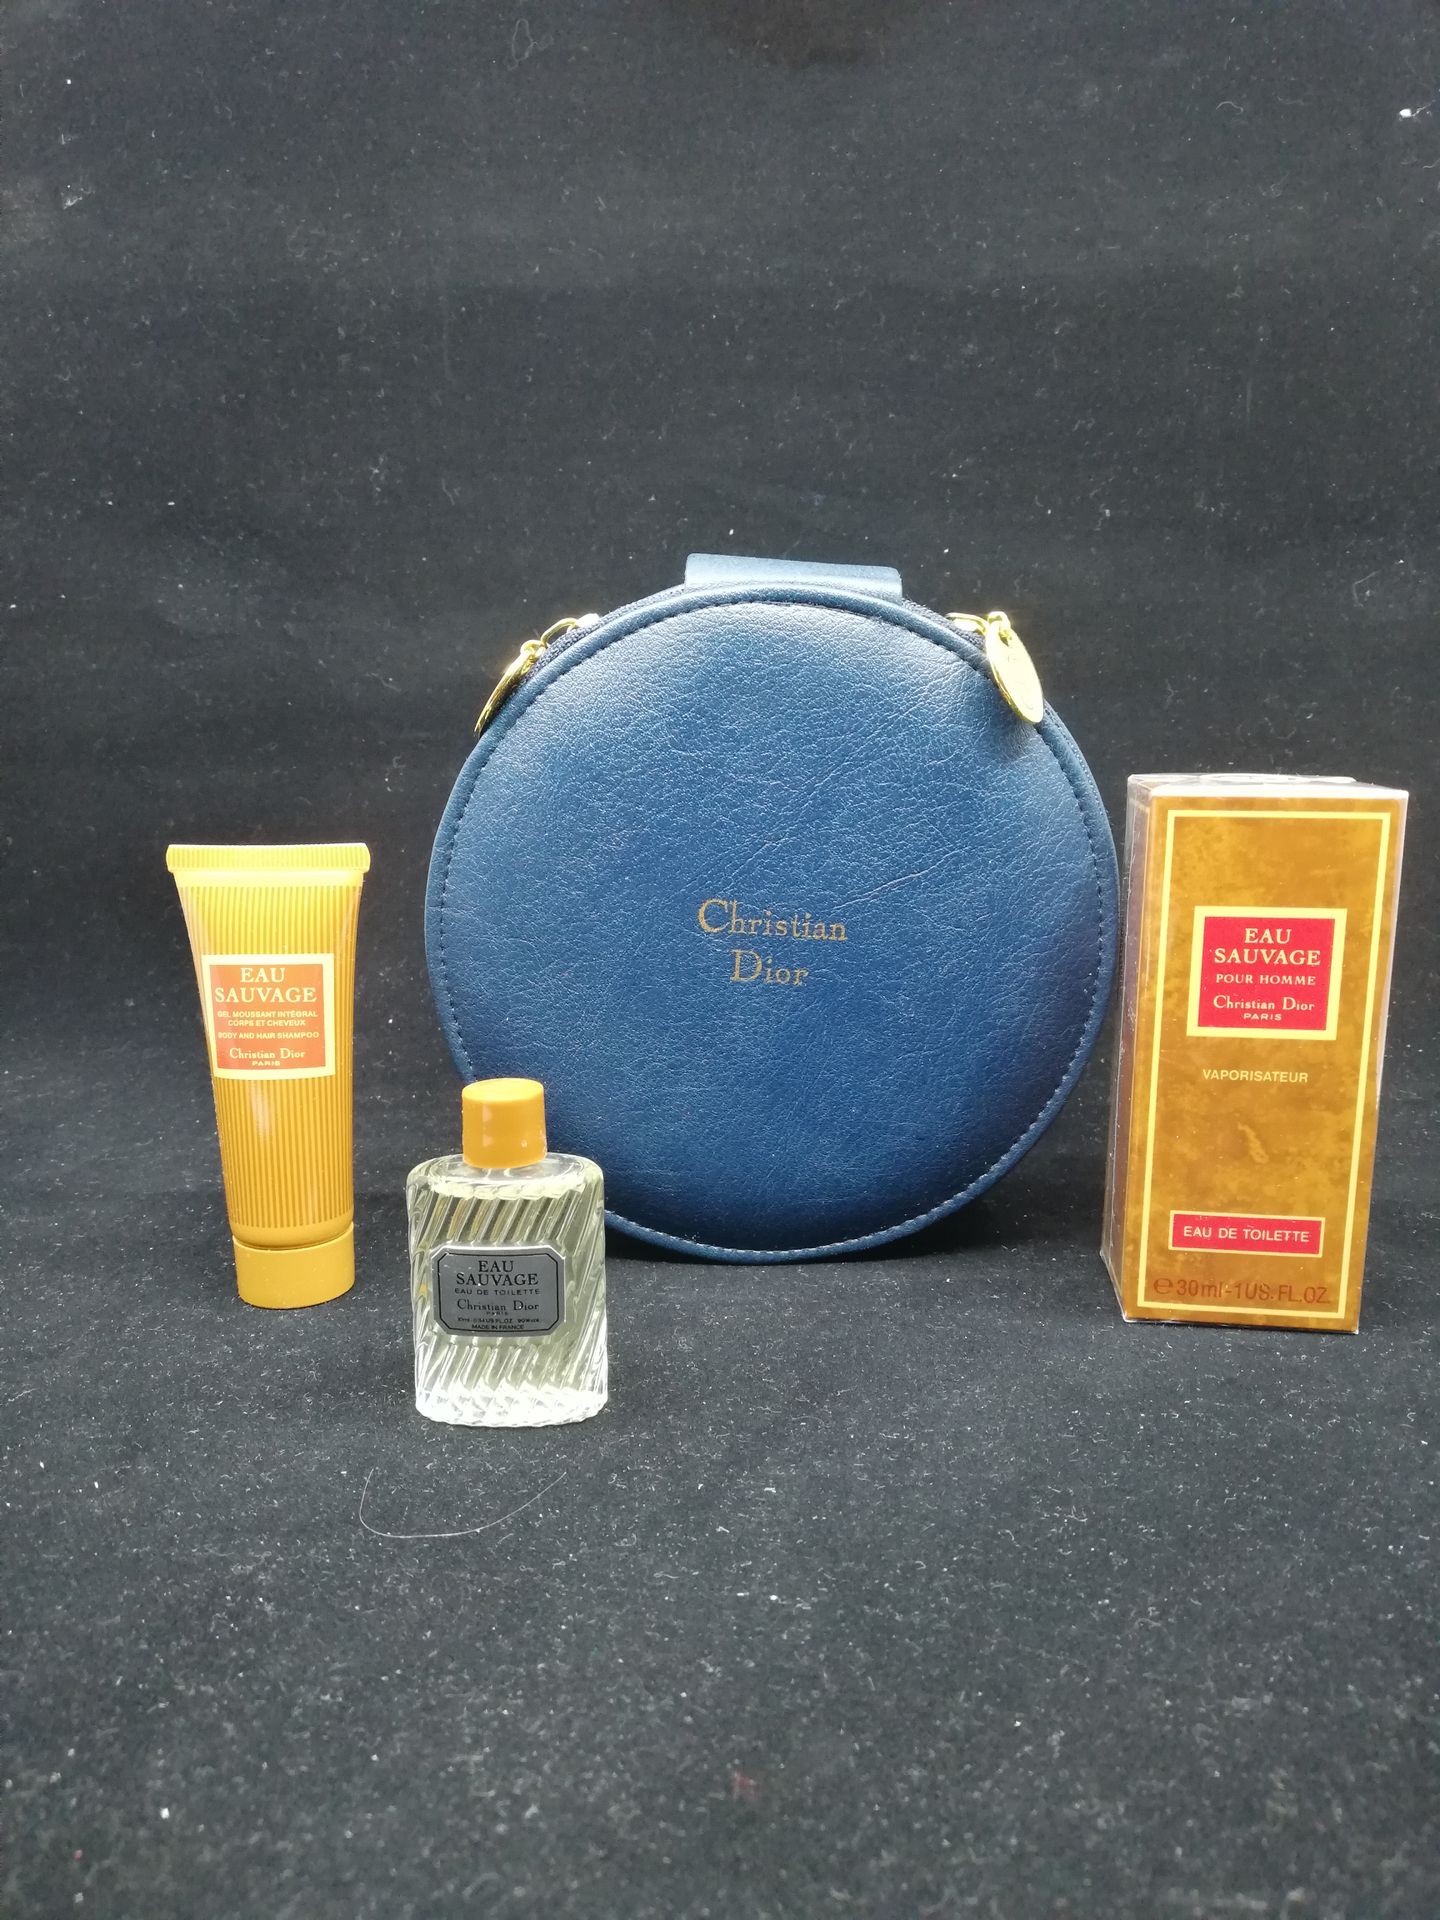 Null Christian Dior - (1990's)

Travel box titled in imitation leather containin&hellip;